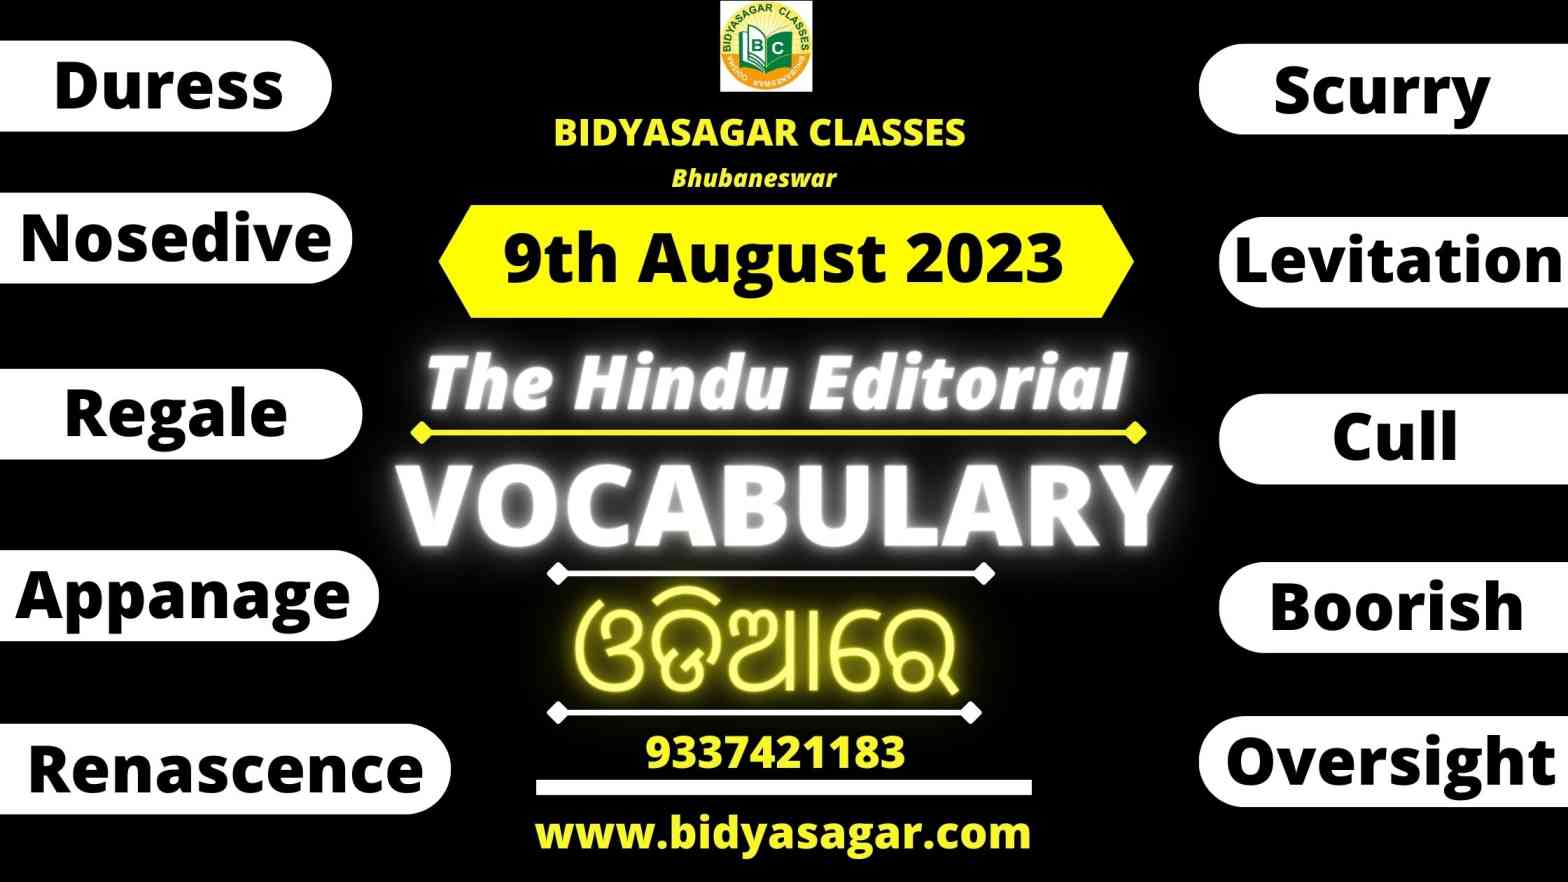 The Hindu Editorial Vocabulary of 9th August 2023